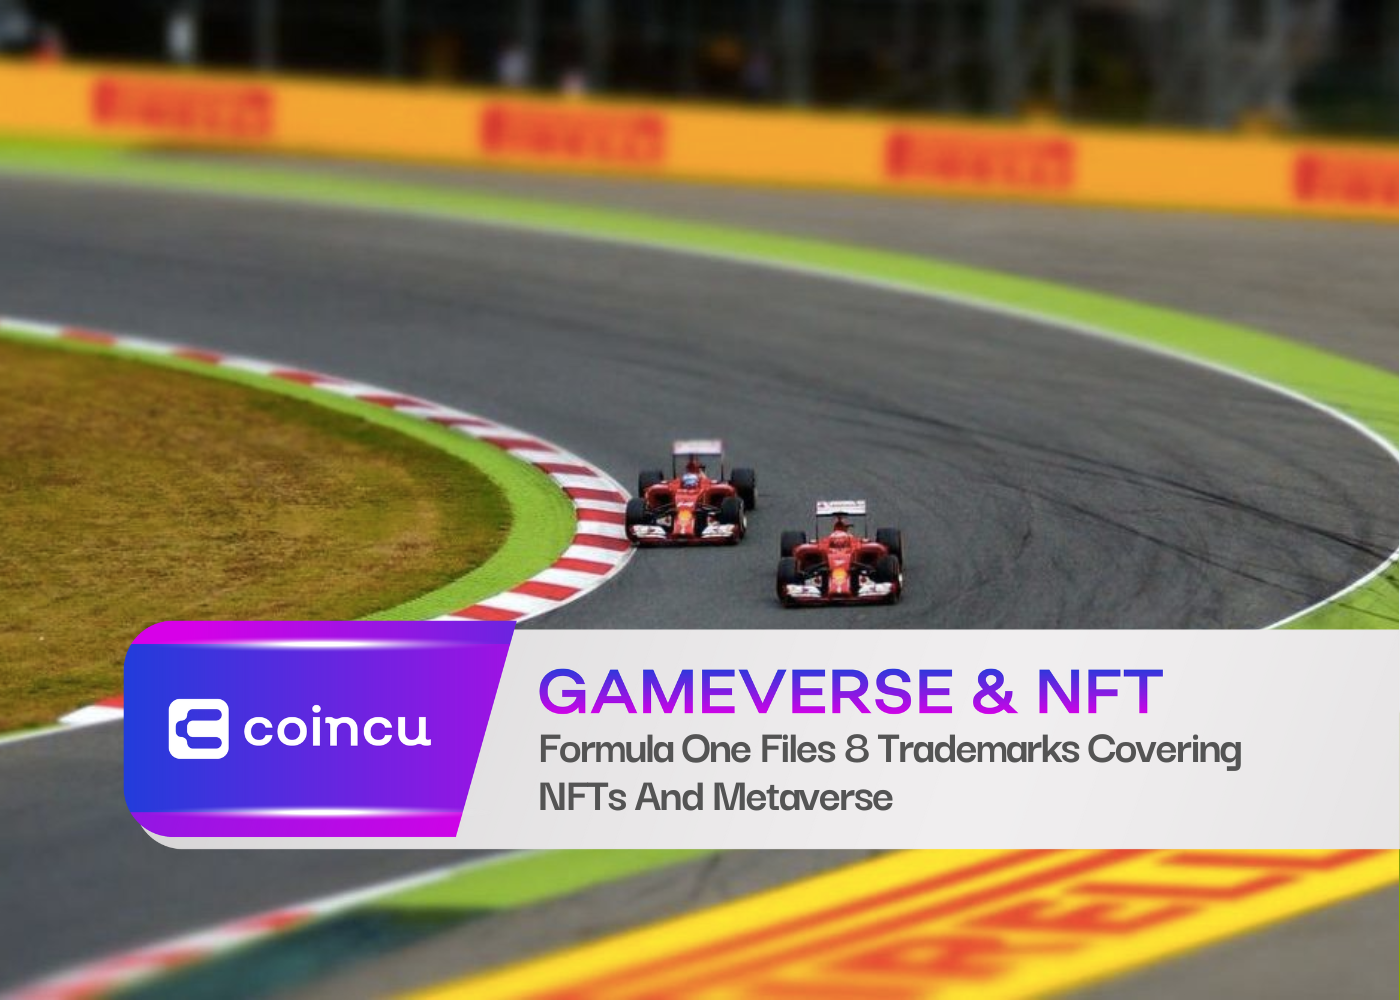 Formula One Files 8 Trademarks Covering NFTs And Metaverse